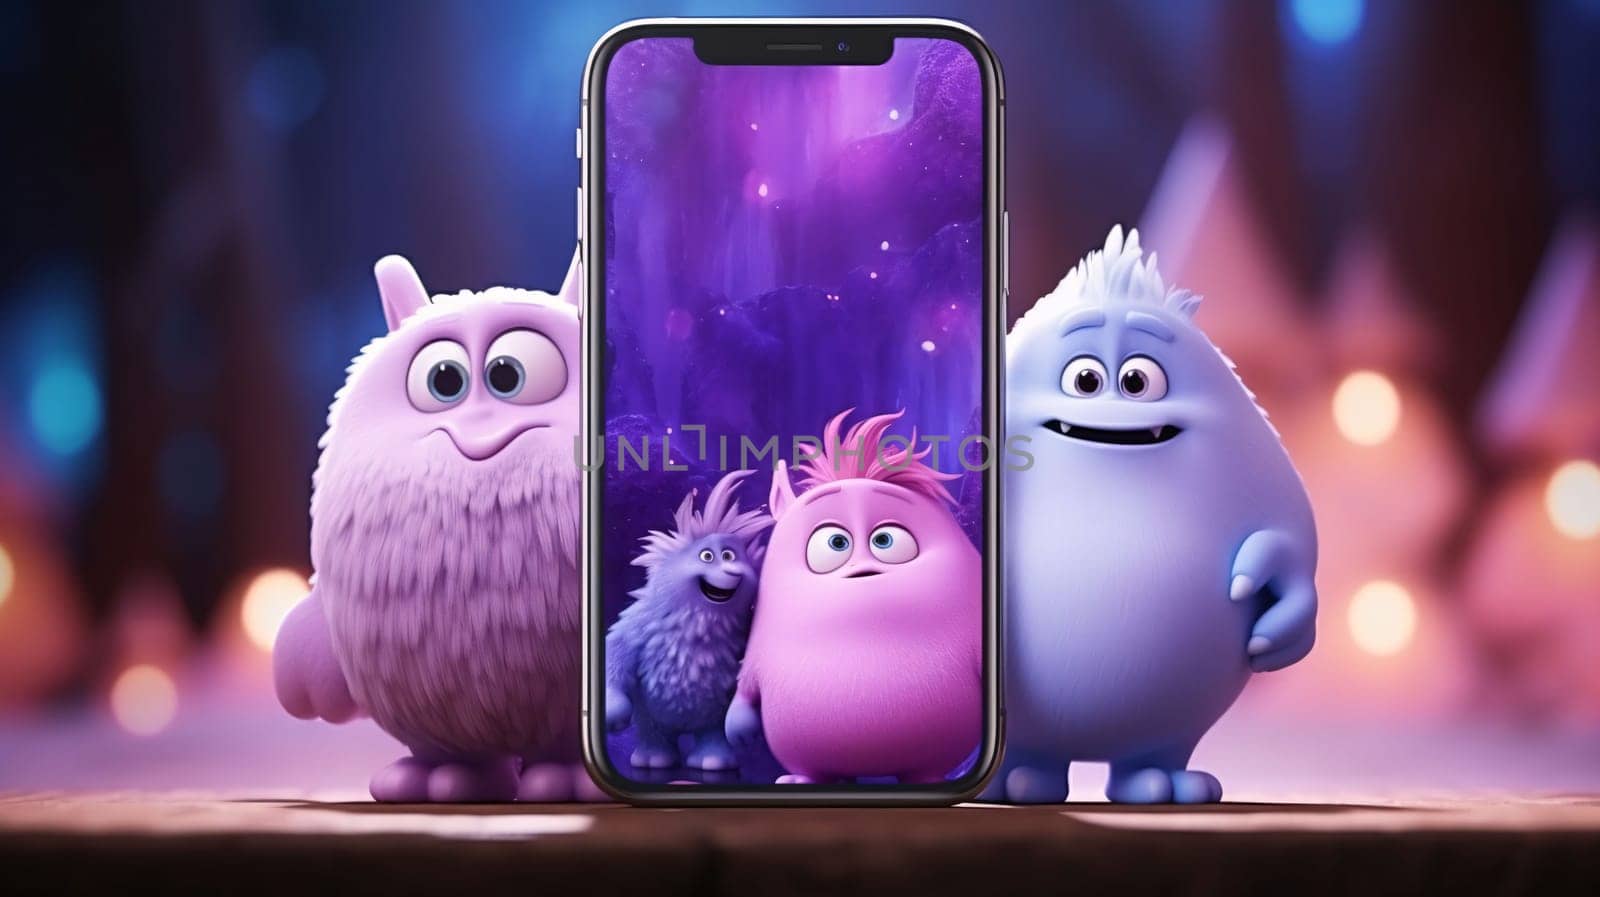 Smartphone screen: Smartphone with purple monsters on the background of the night city.